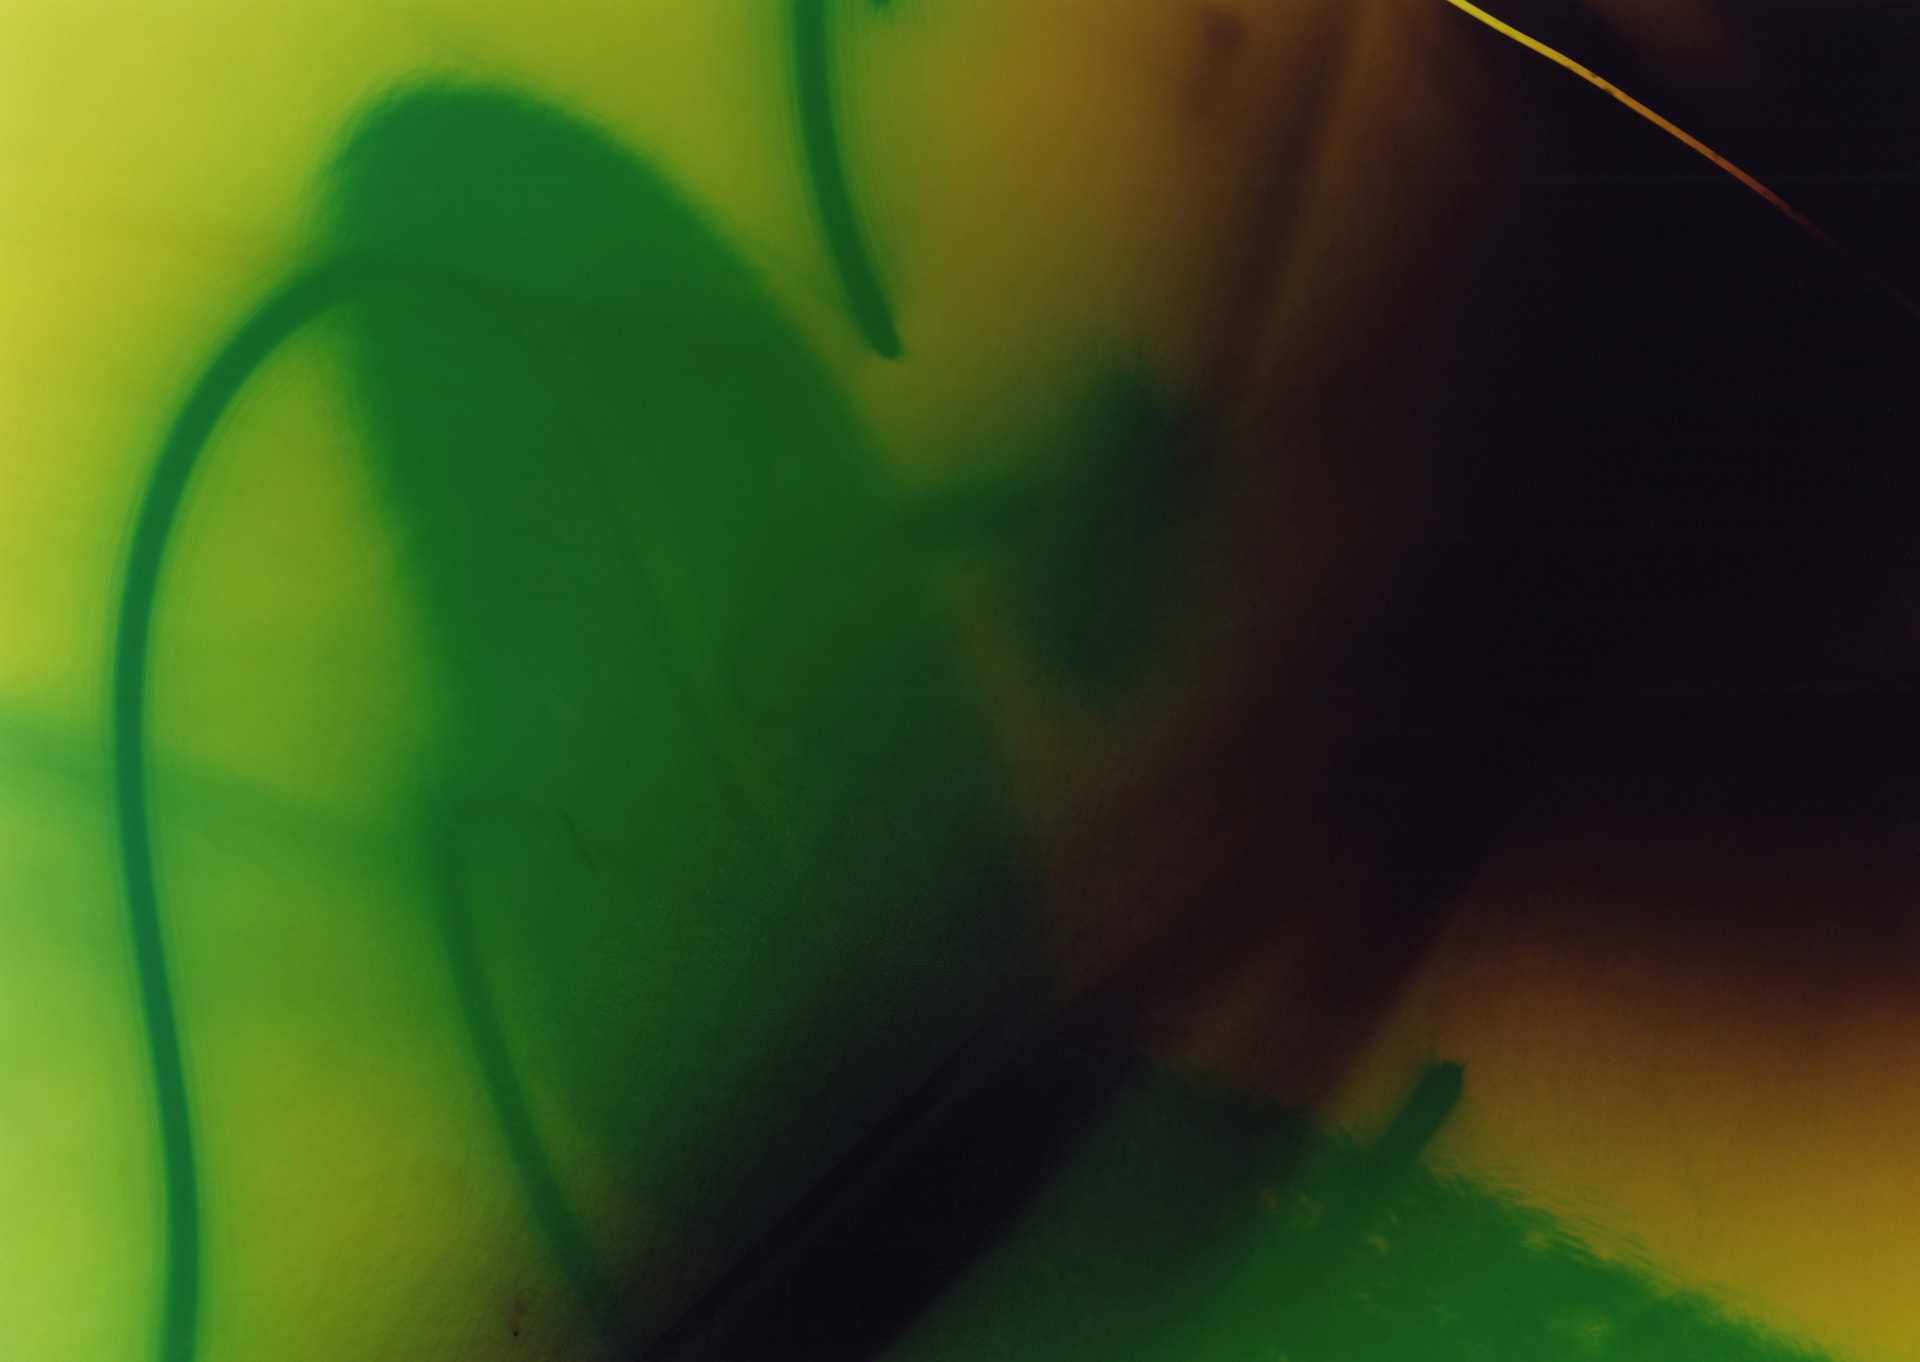 Green abstract photogram with flashes of black and yellow